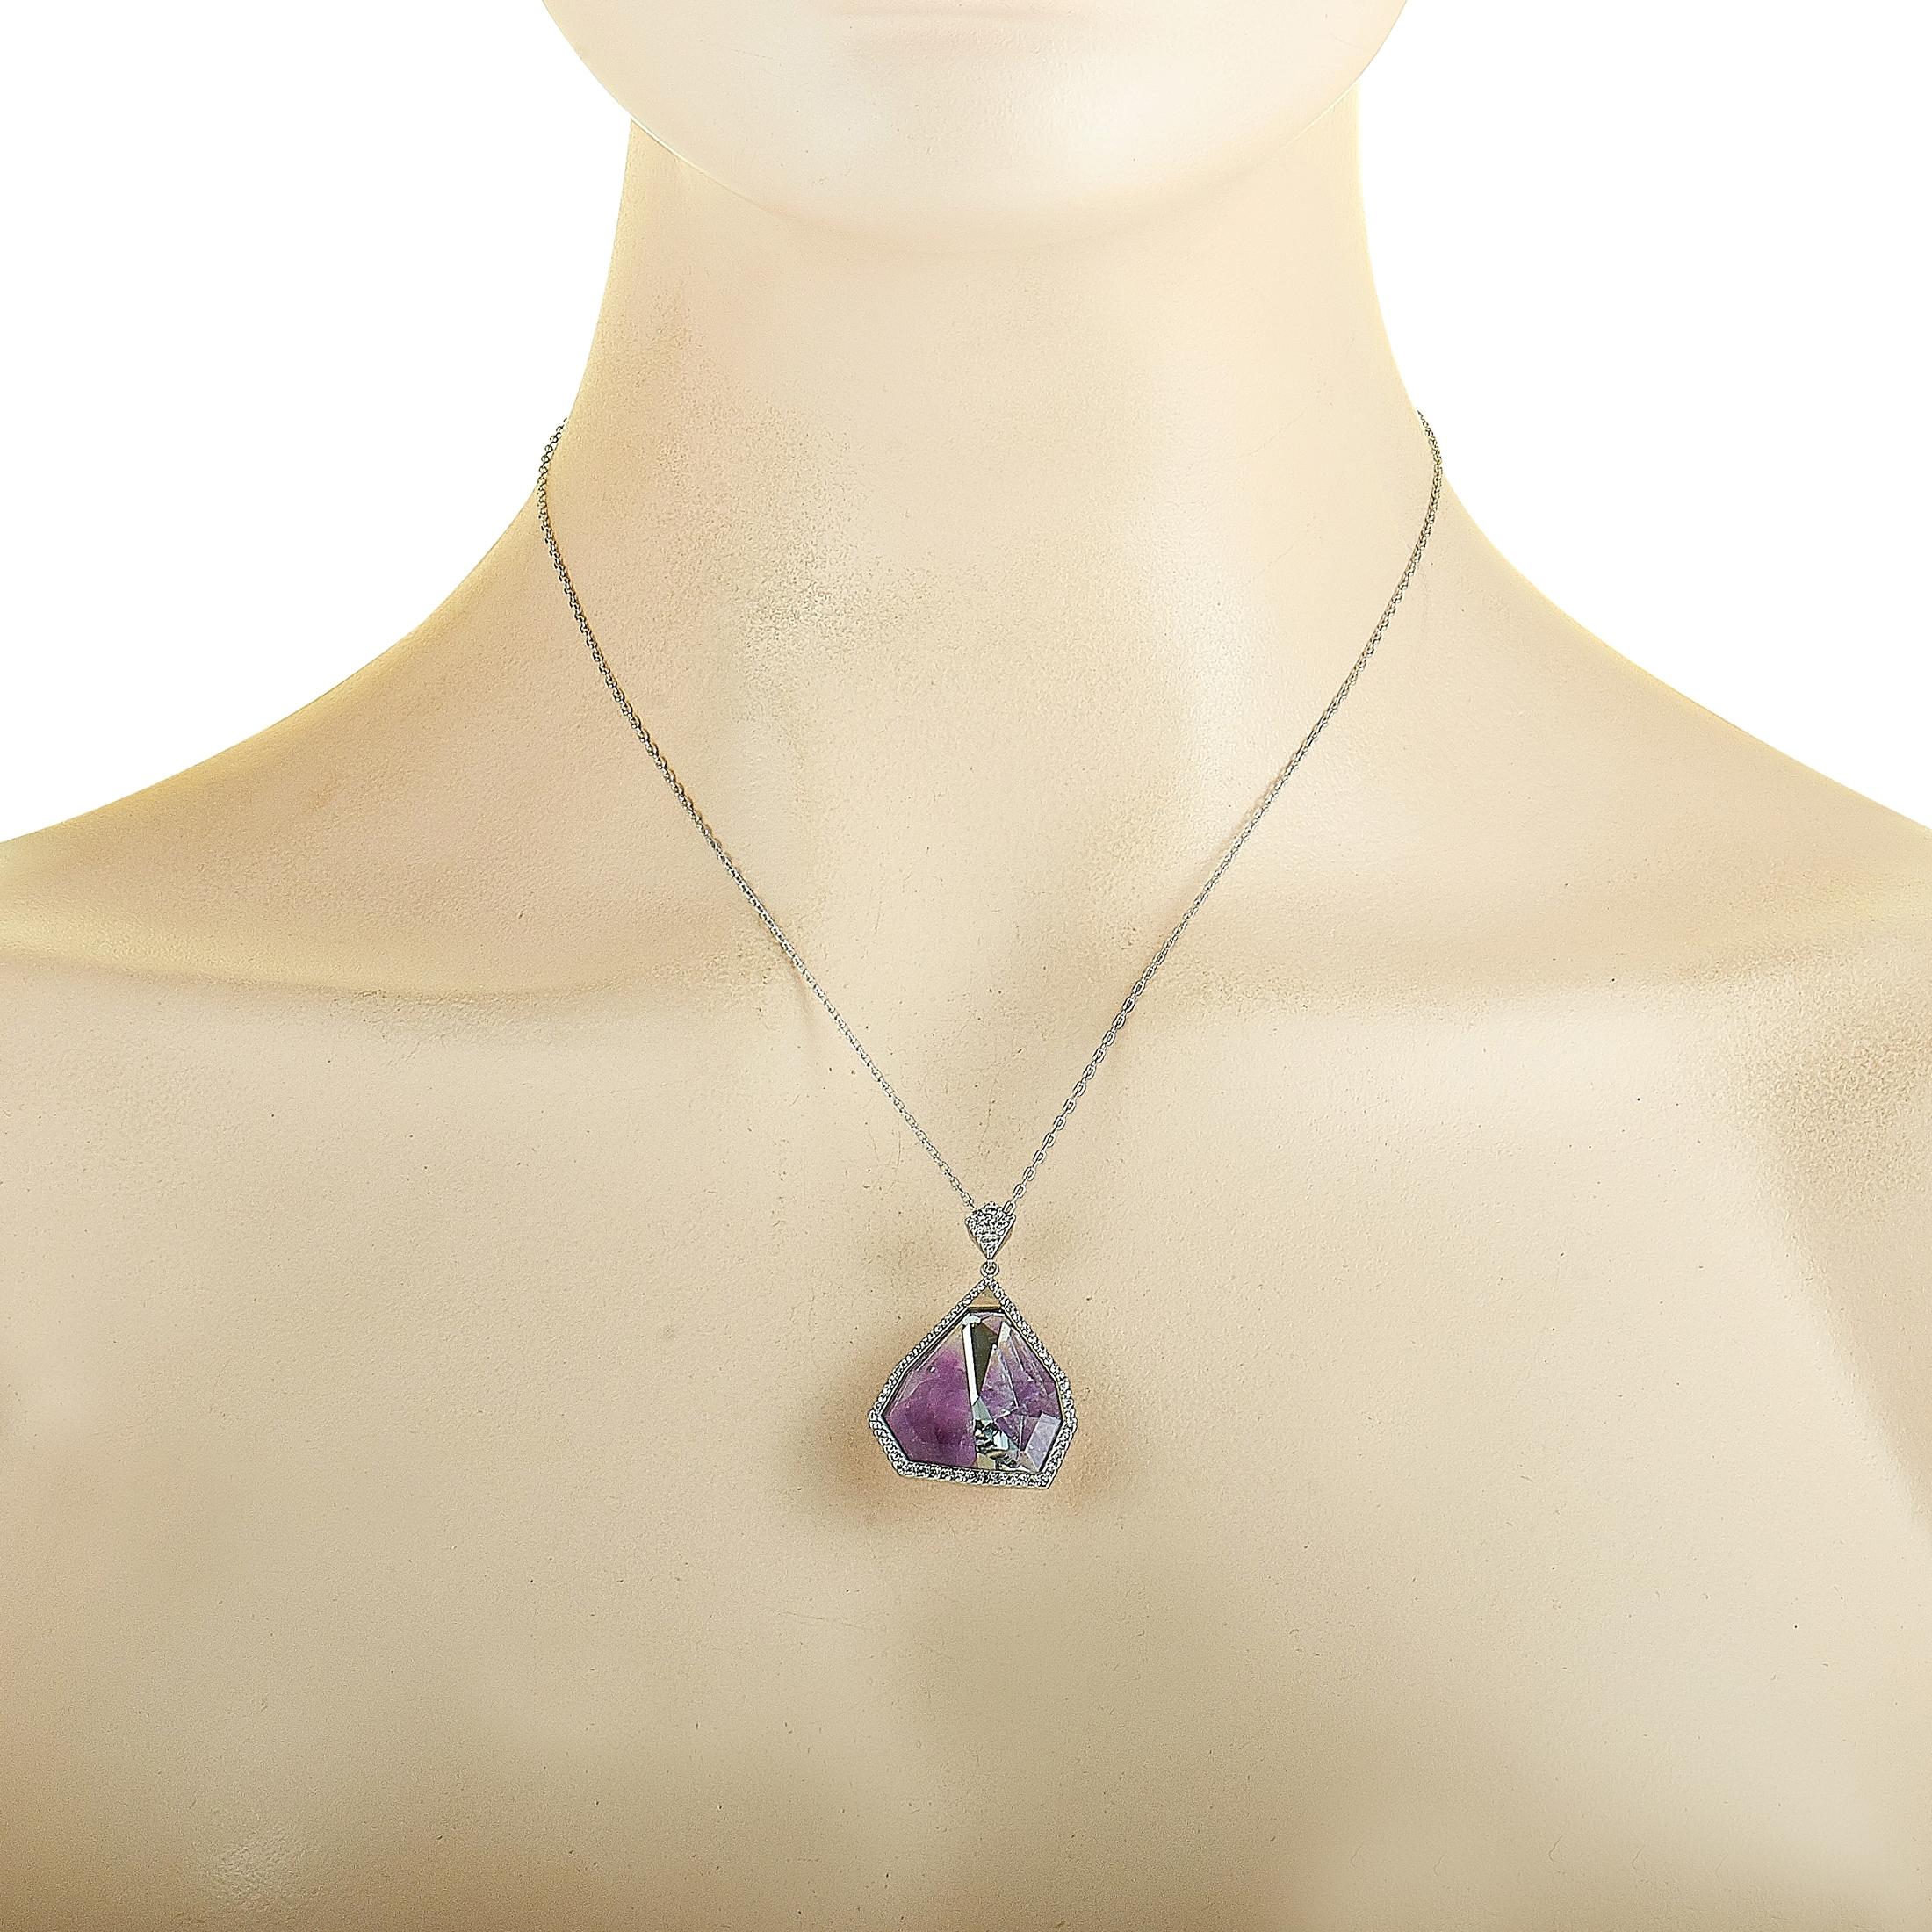 This Swarovski necklace is crafted from rhodium-plated stainless steel and decorated with purple and clear Swarovski crystals. The necklace weighs 15.7 grams and boasts an 18” chain and a pendant that measures 1.62” in length and 1” in width.